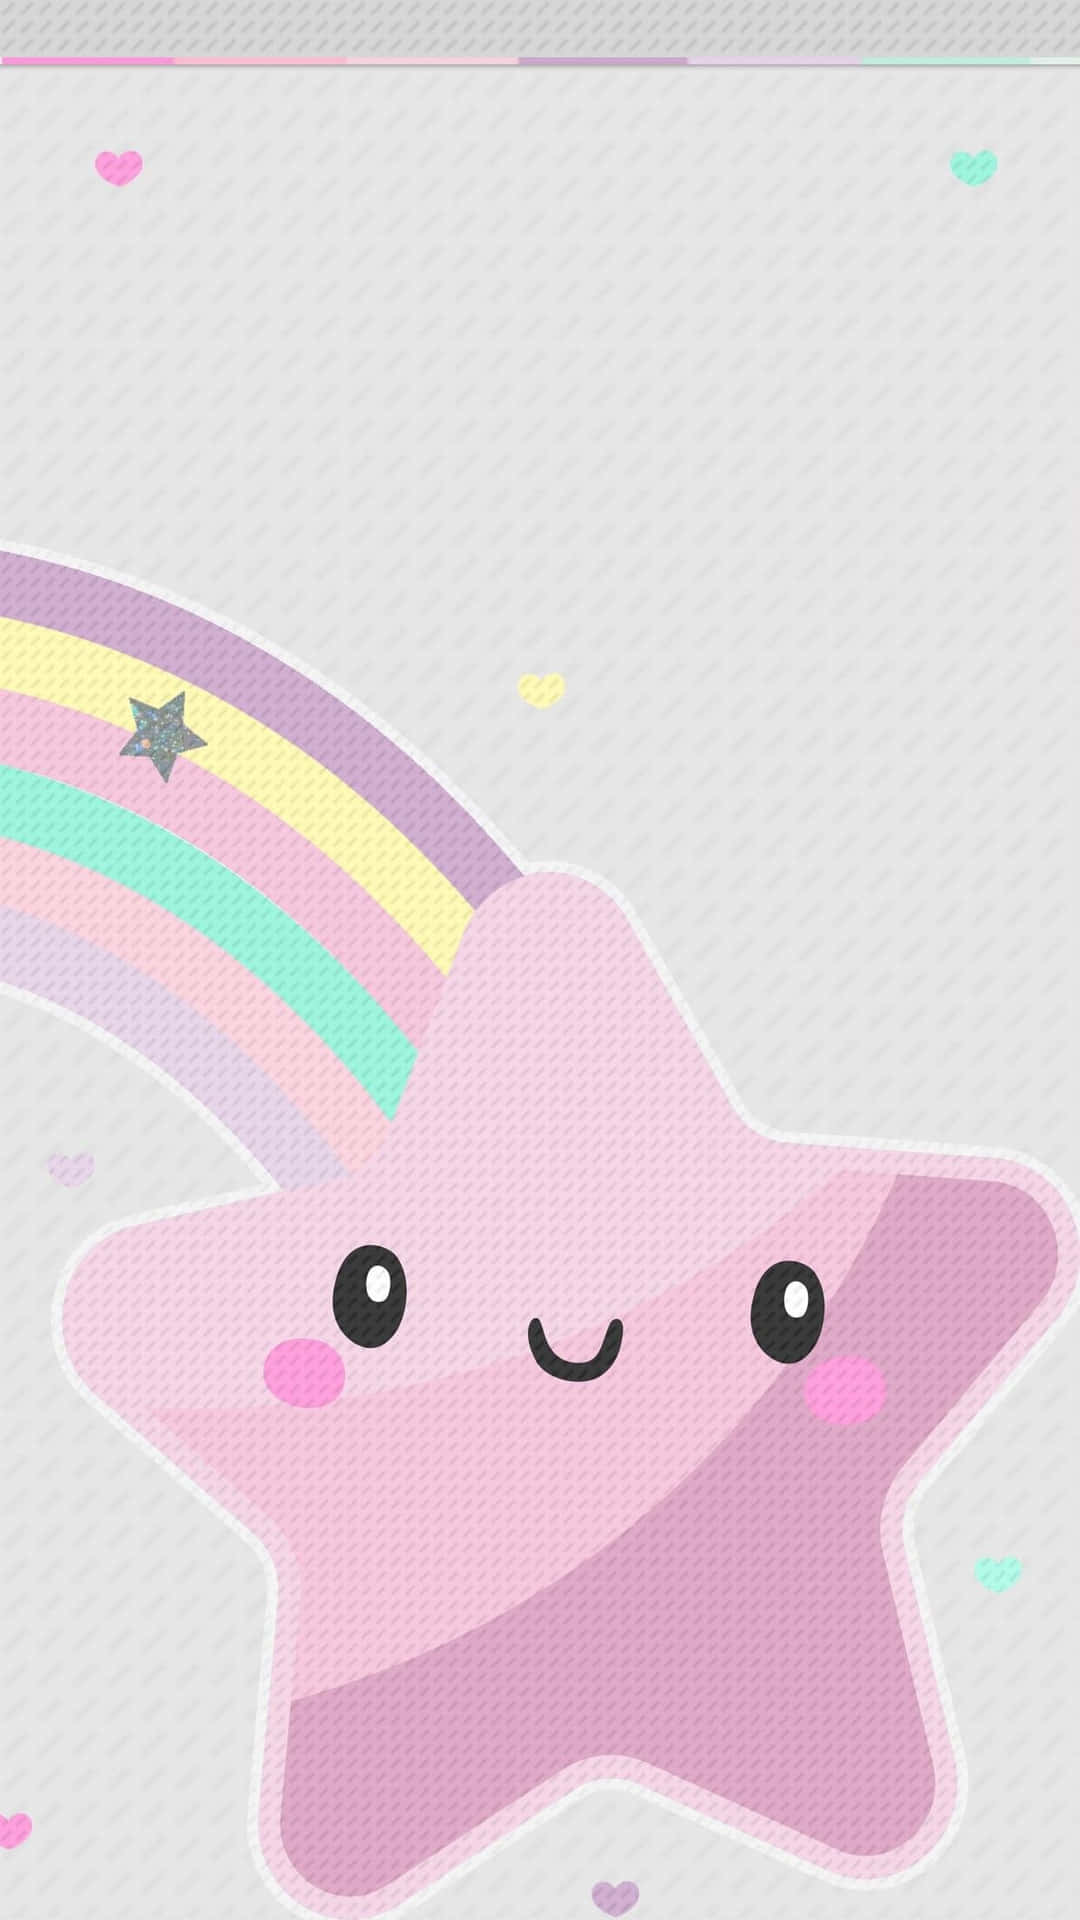 Adorable Kawaii Rainbow bringing joy and colors to your day. Wallpaper